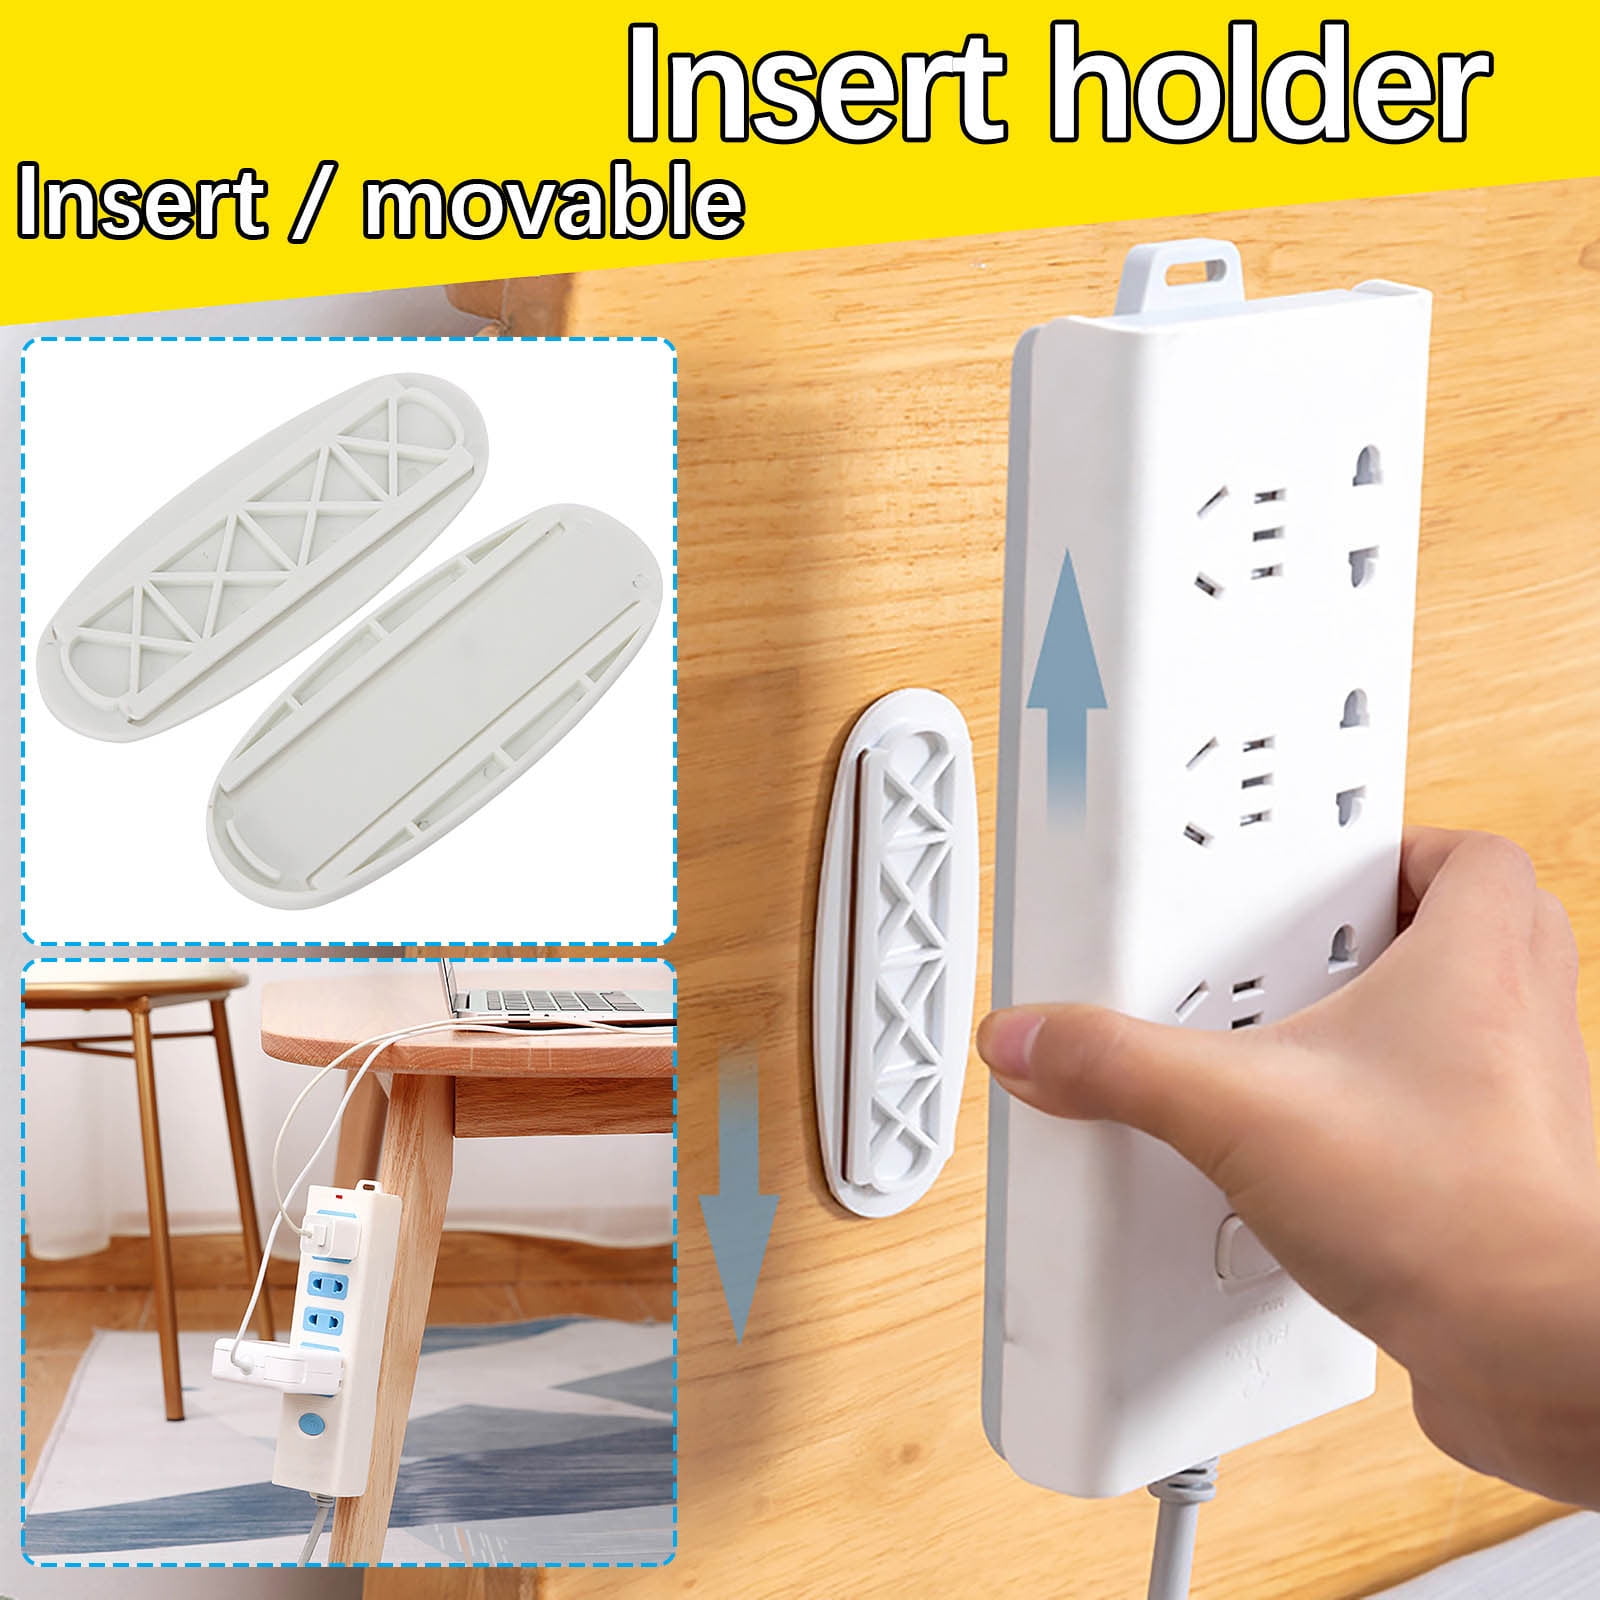 Dream Lifestyle Adhesive Power Strip Holder Wall Mount Power Outlet Strip  Holder Sticker Fixer, Mount Punch Free Cable Management, Plug Socket  Catcher Holder Router Manager Wire Clip Storage 